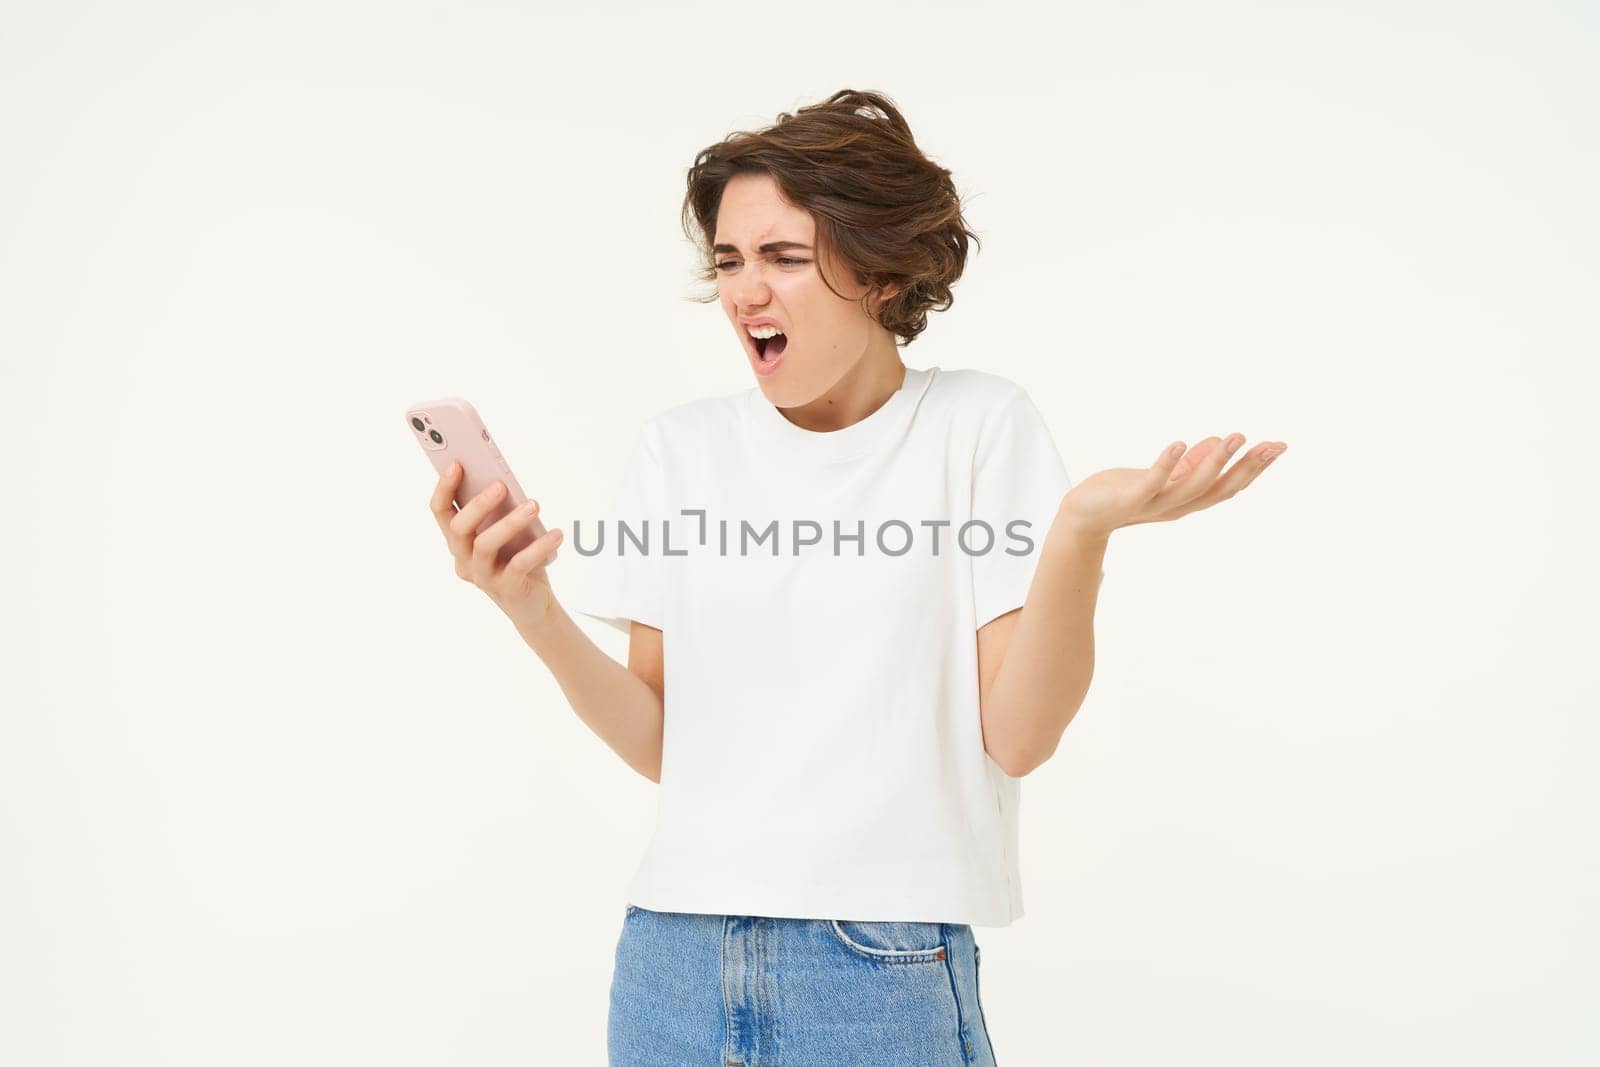 Portrait of frustrated girl with smartphone, woman looking at telephone and reacting shocked at mobile phone, shrugging shoulders, standing over white background.